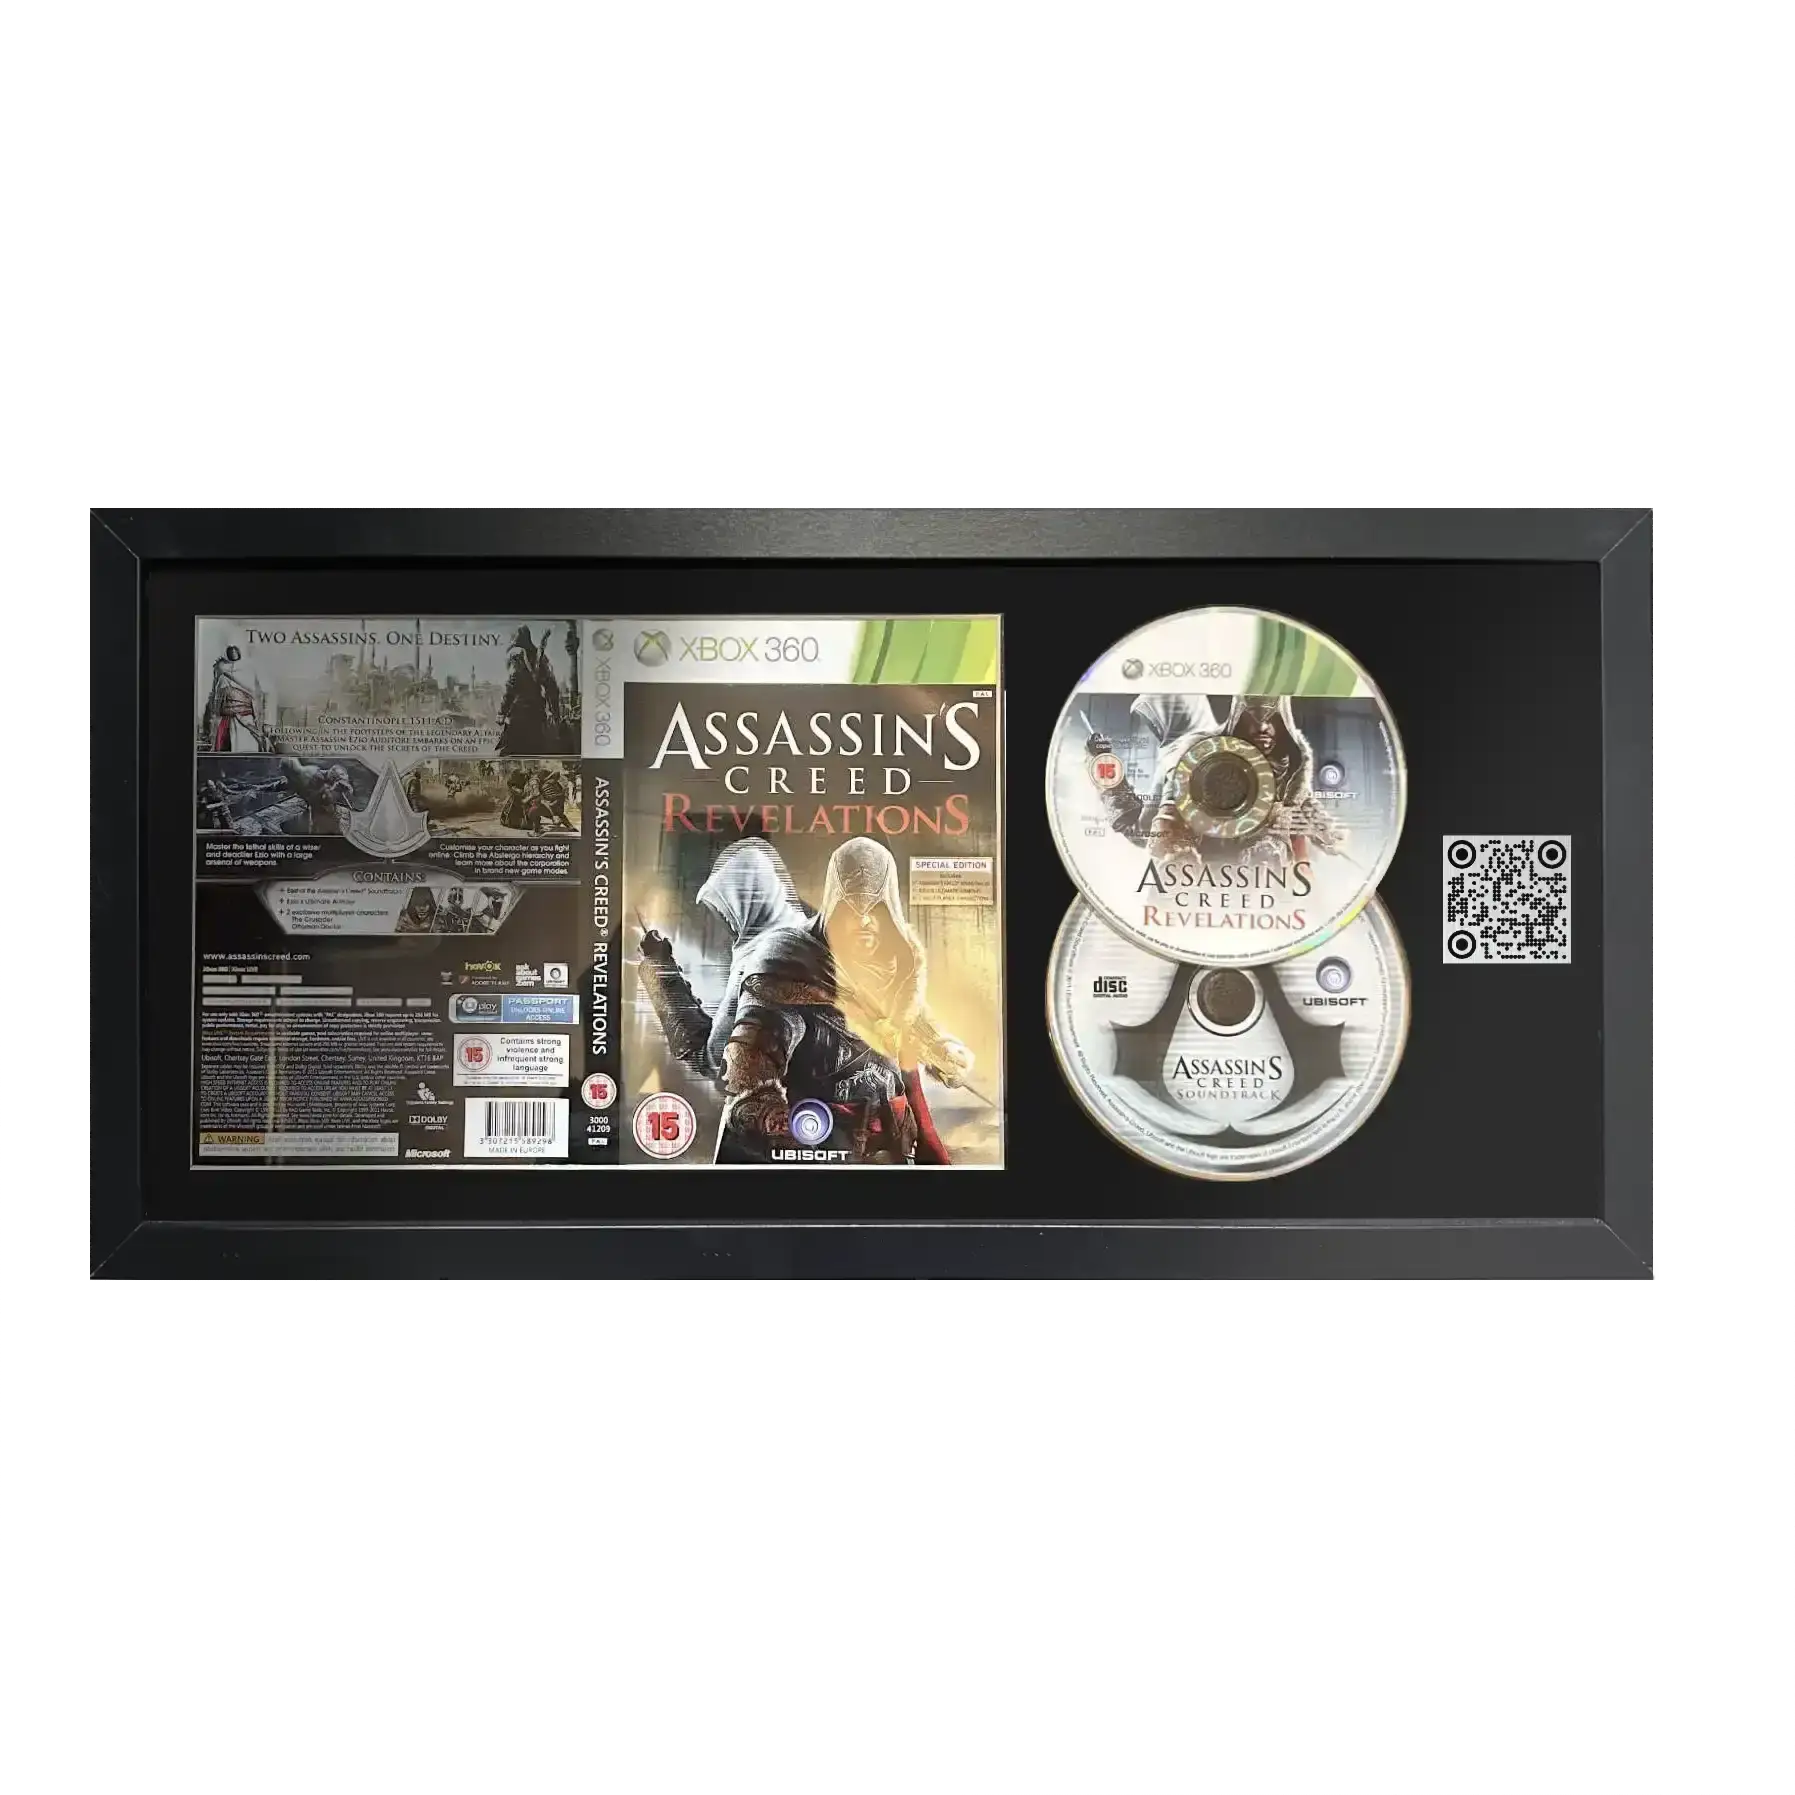 Assassin's creed revelations game for Xbox 360 in a frame with qr code